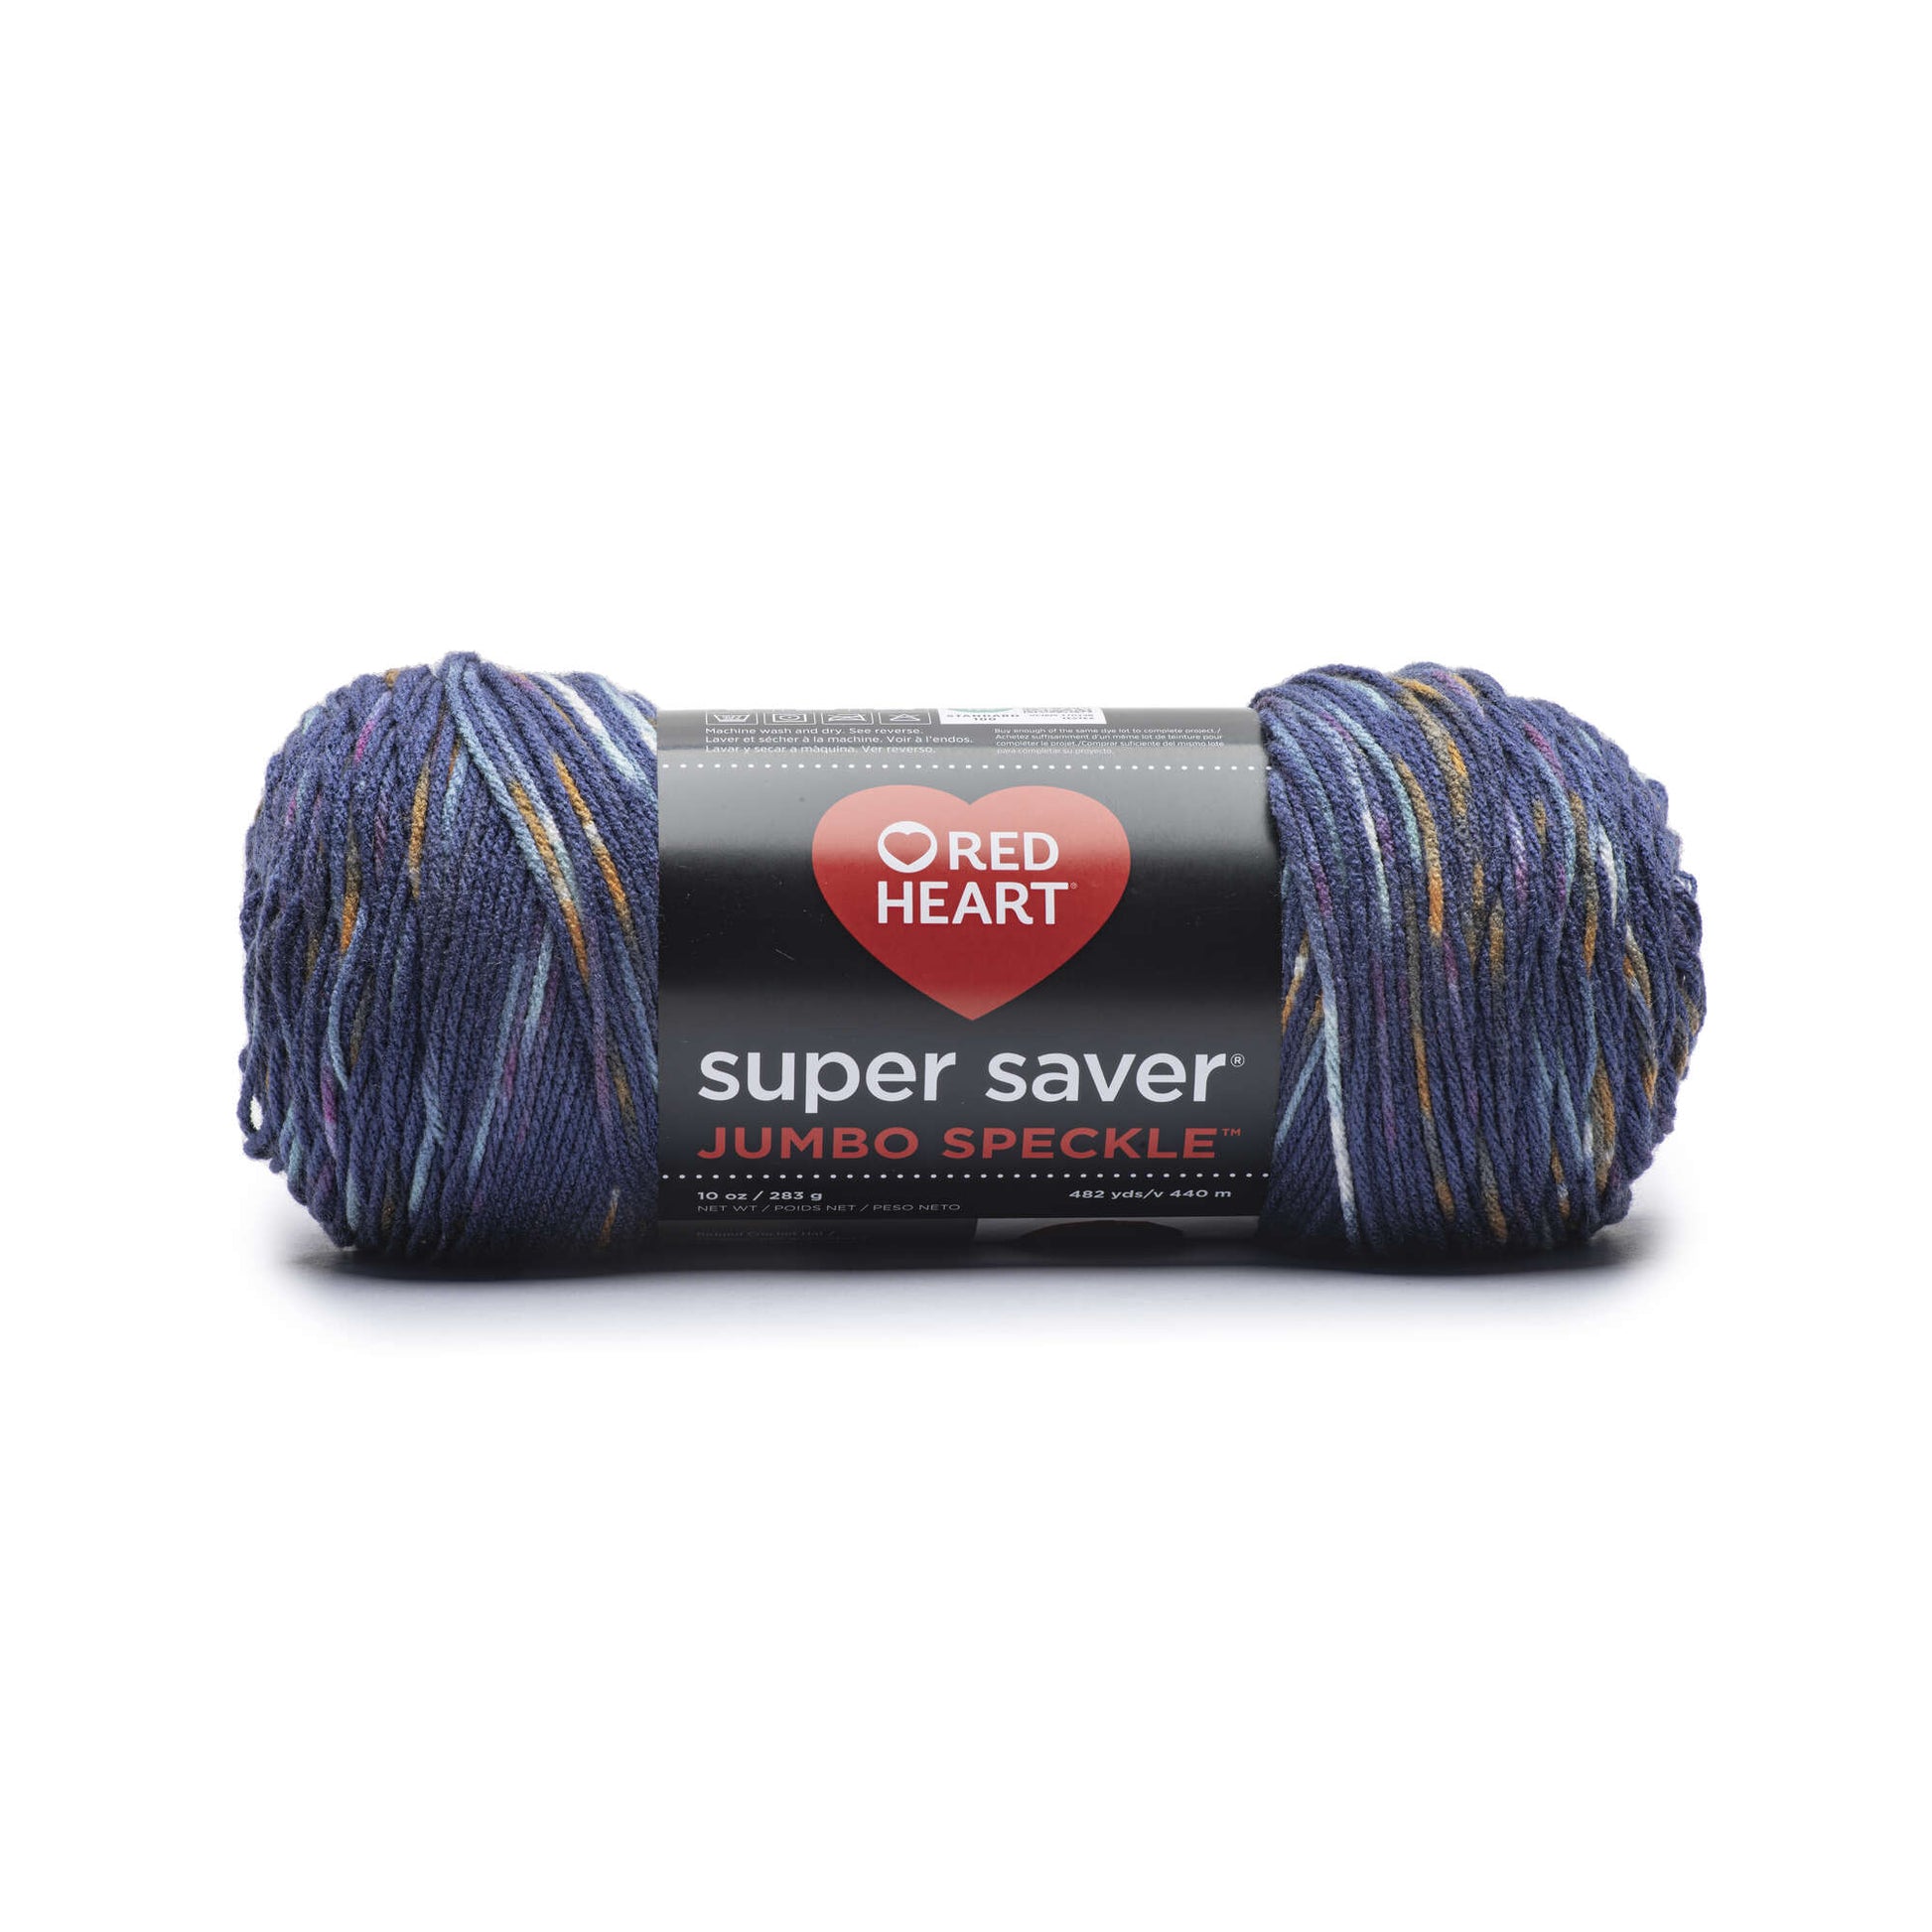 Red Heart Super Saver Jumbo Speckle Yarn Soft Navy Speckle